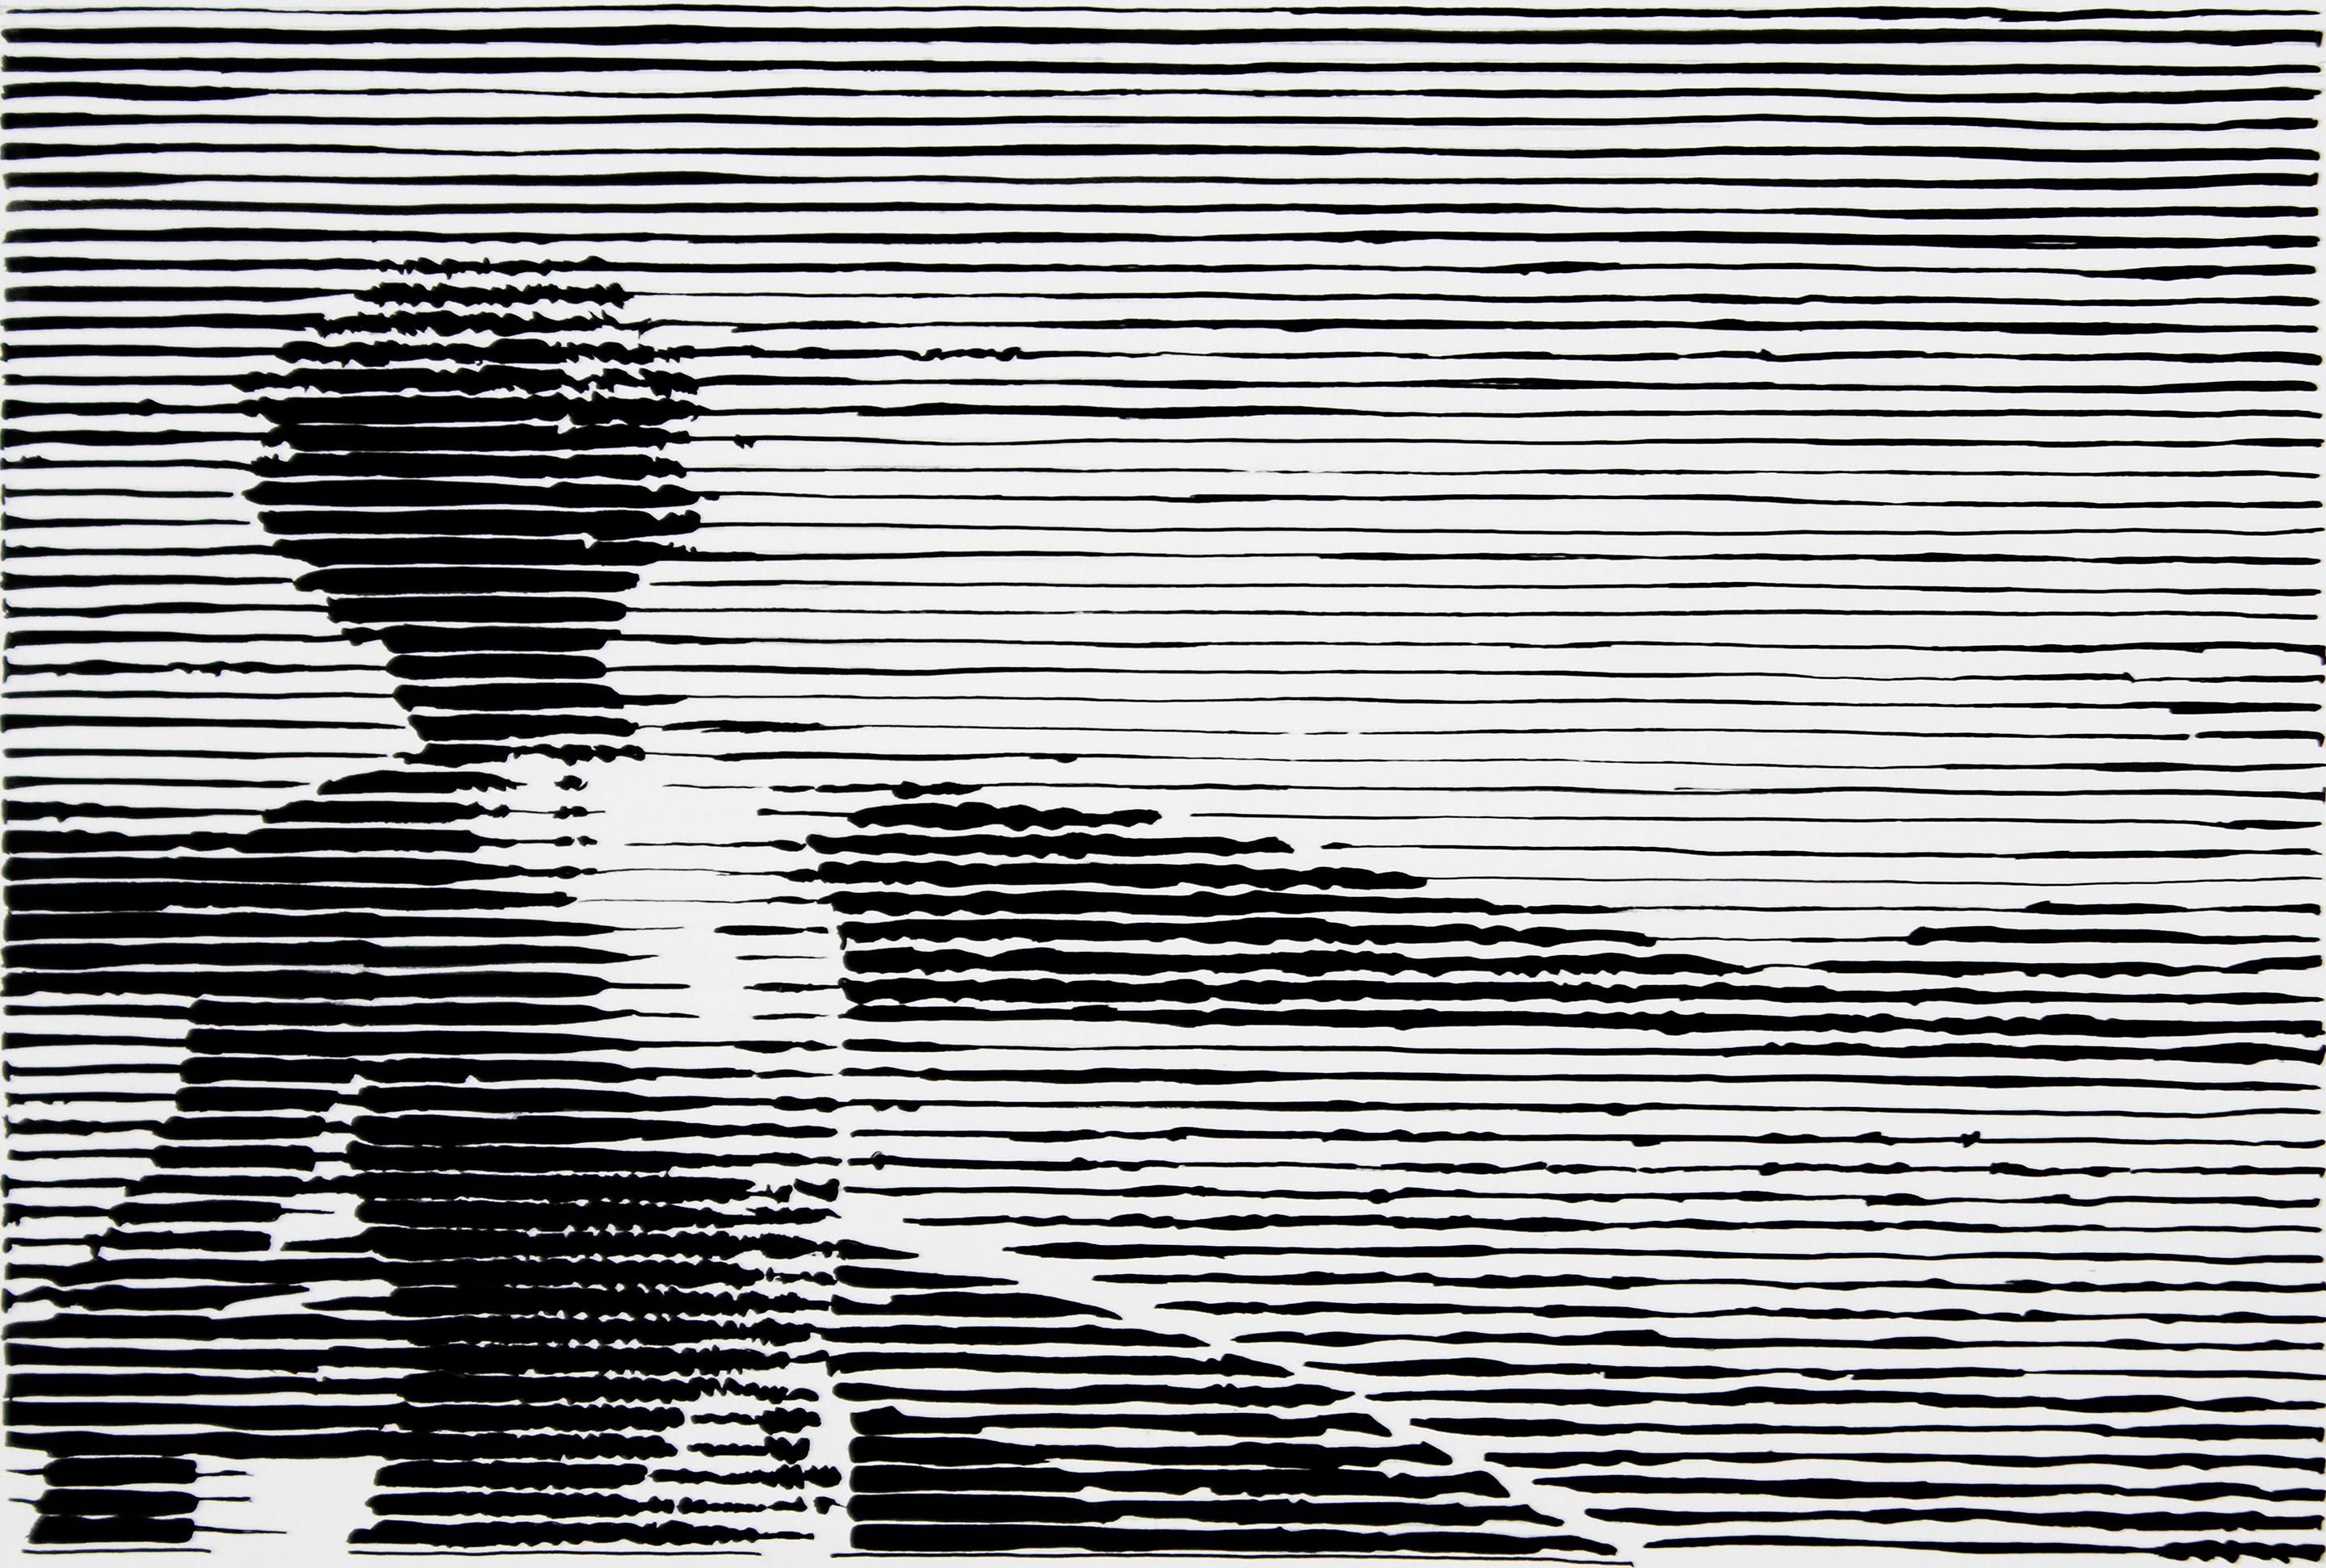 Charles Buckley Portrait - Born on a Boat, black and white work on paper, woman on lake, stripes